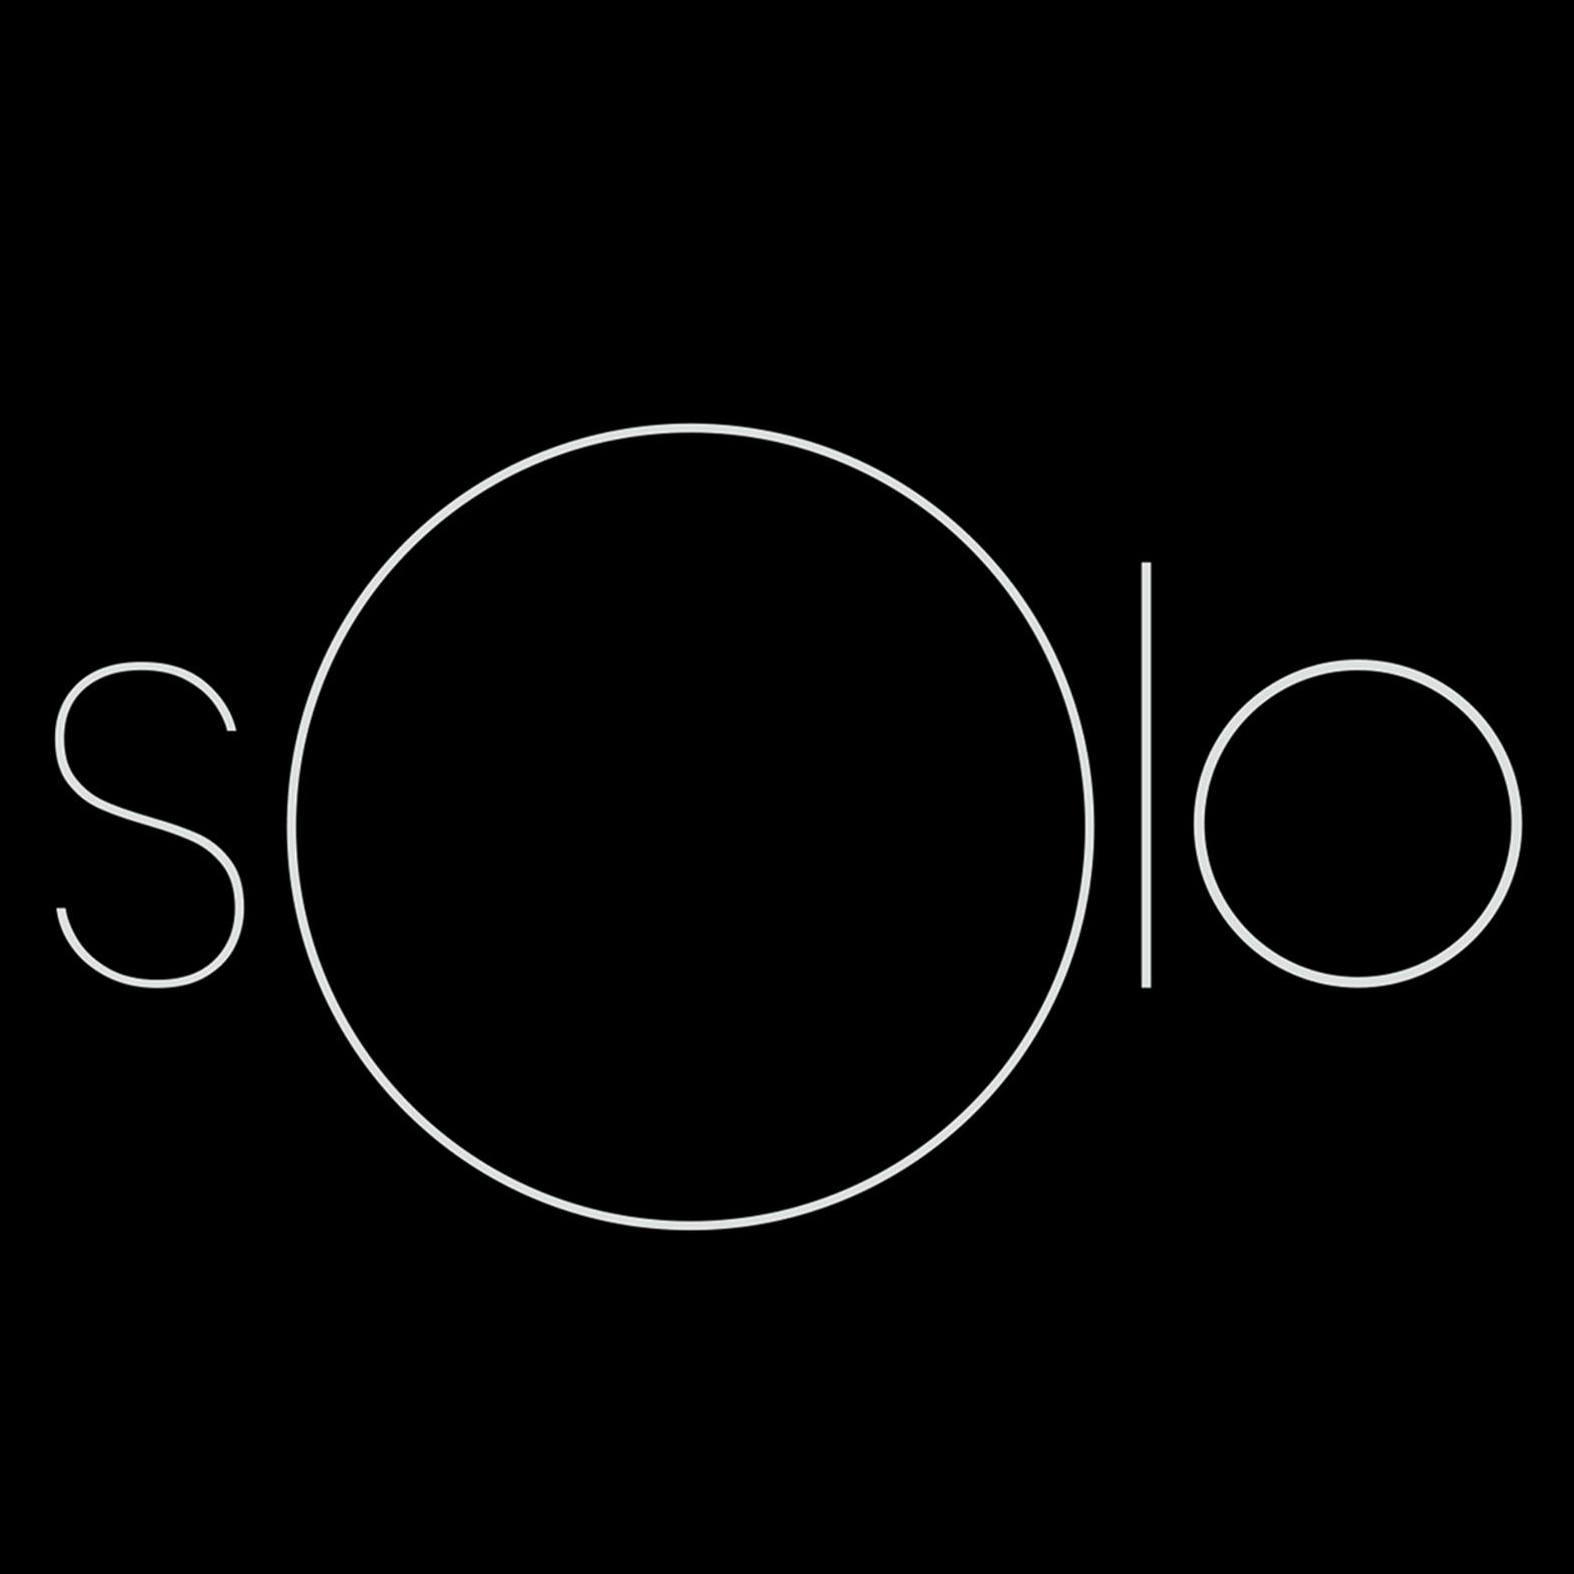 sOlo Architects|Architect|Professional Services